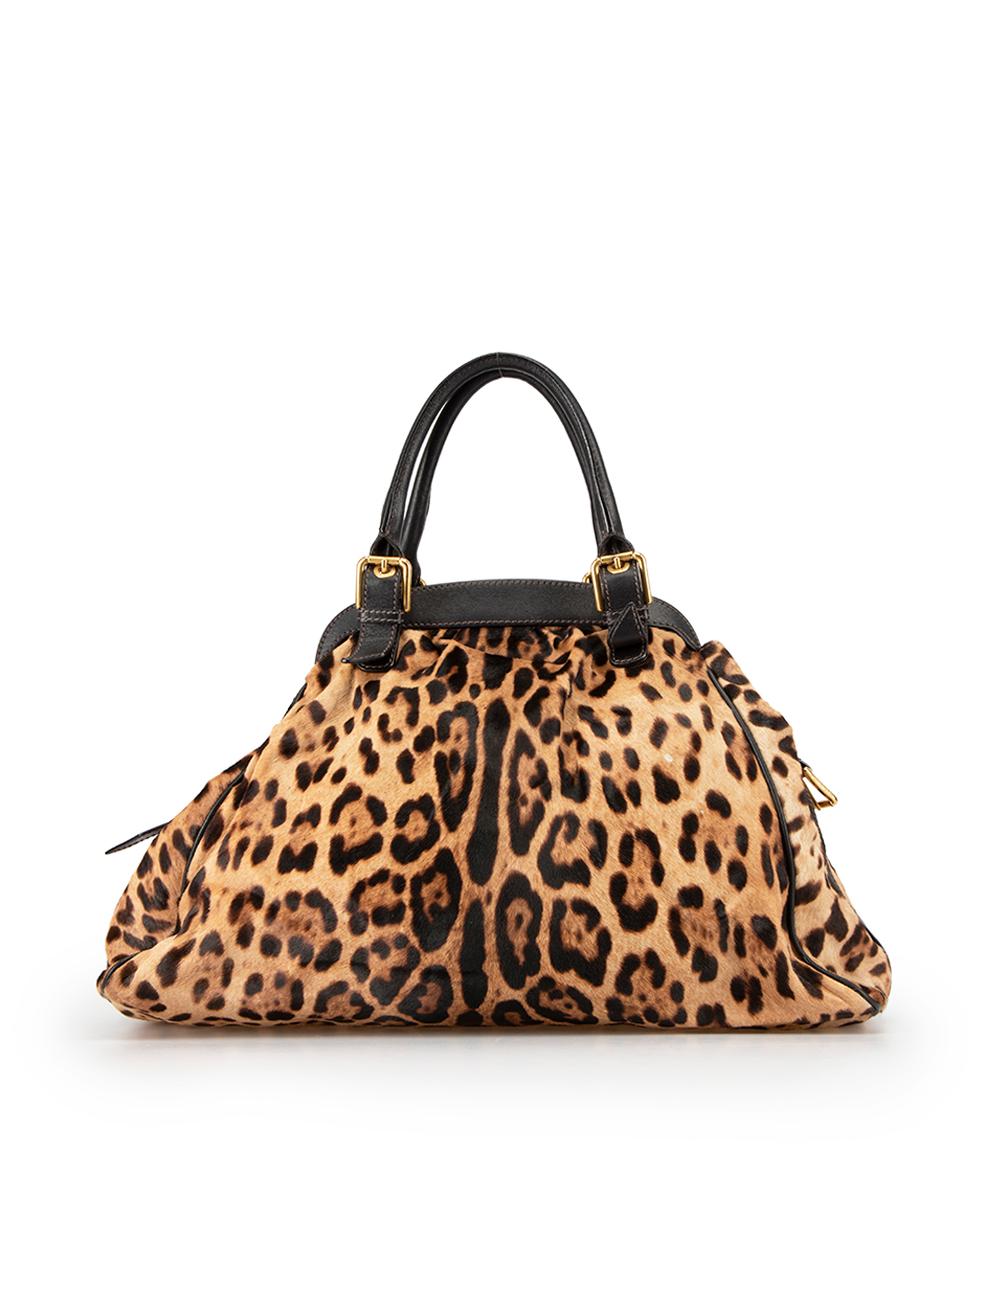 Dolce & Gabbana Brown Pony Hair Leopard Handbag In Good Condition For Sale In London, GB